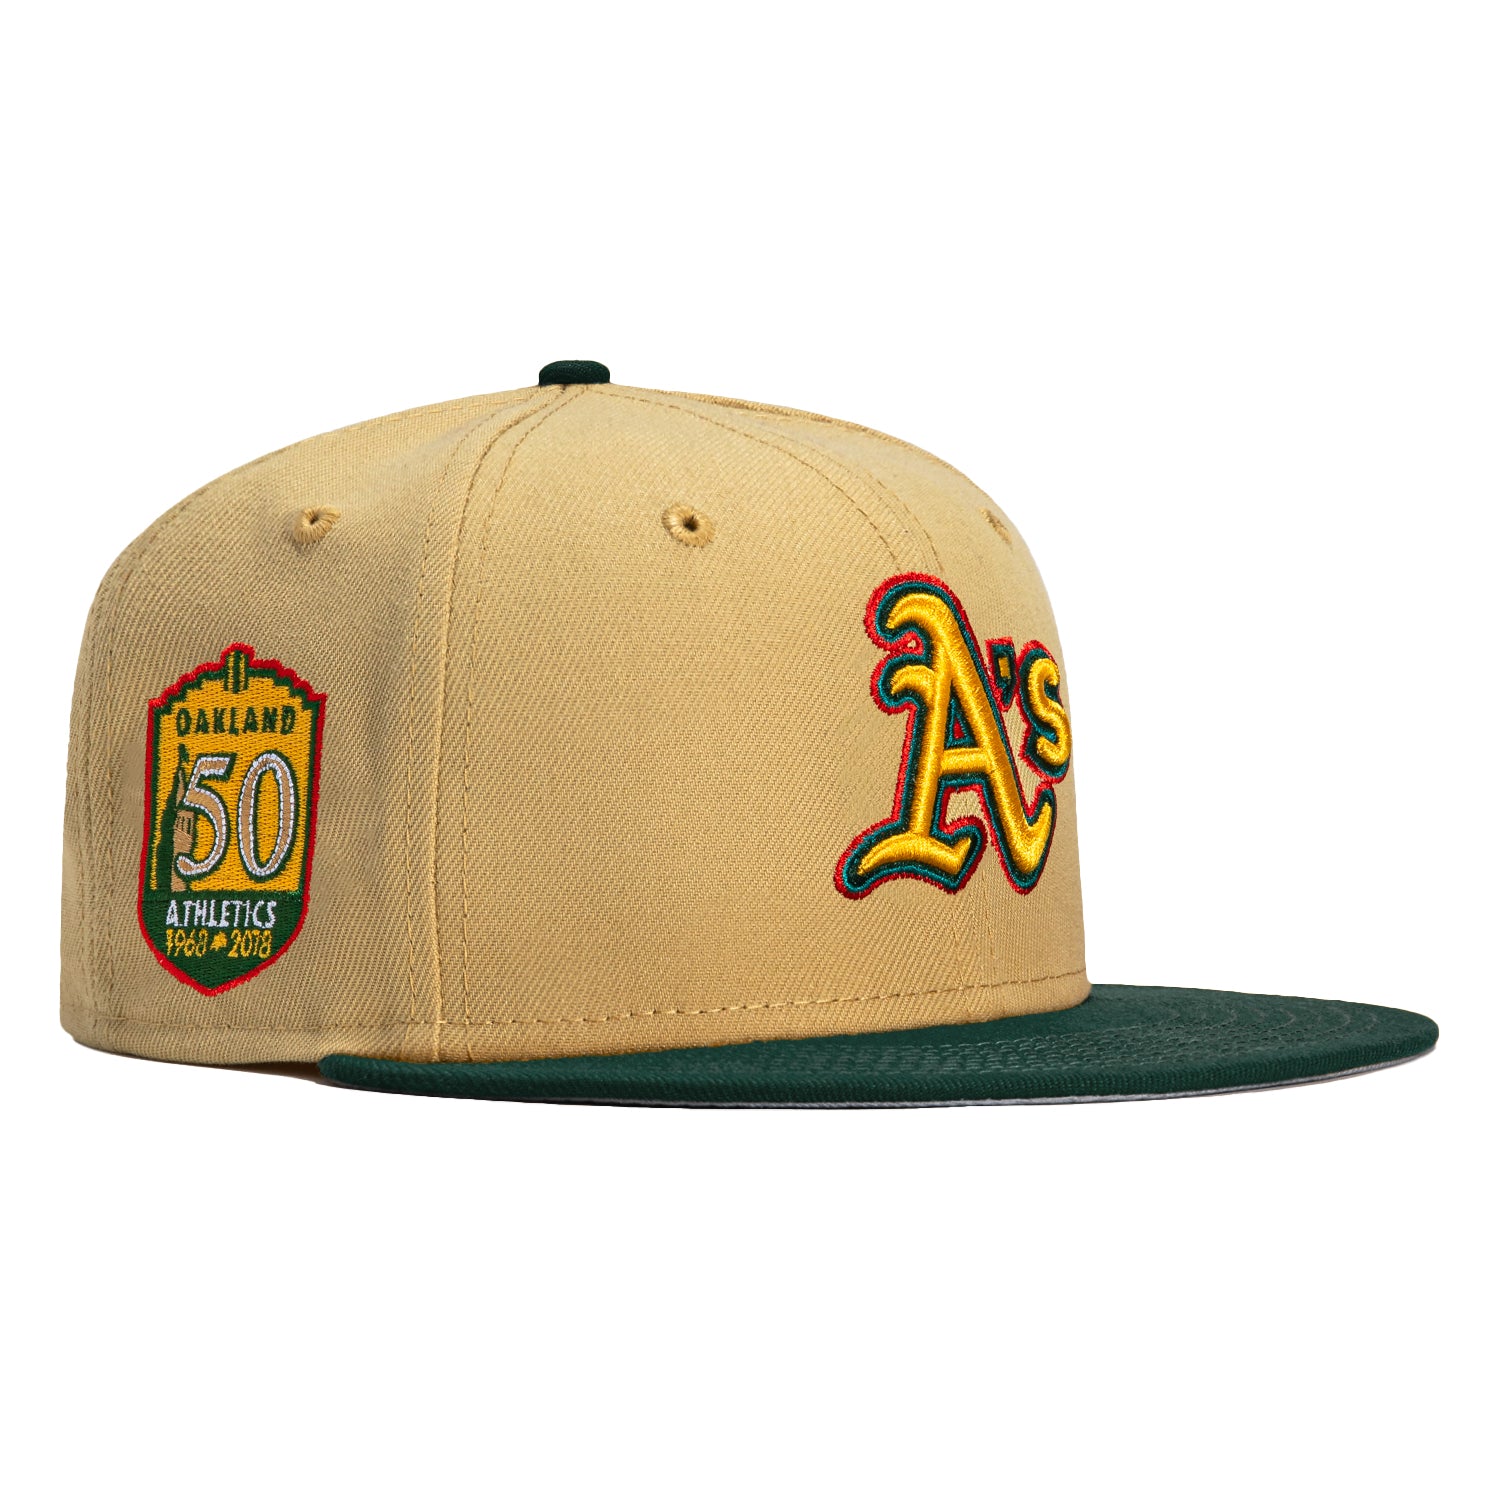 San Francisco Giants New Era 59fifty A's Colors Green And Gold 7 1/4